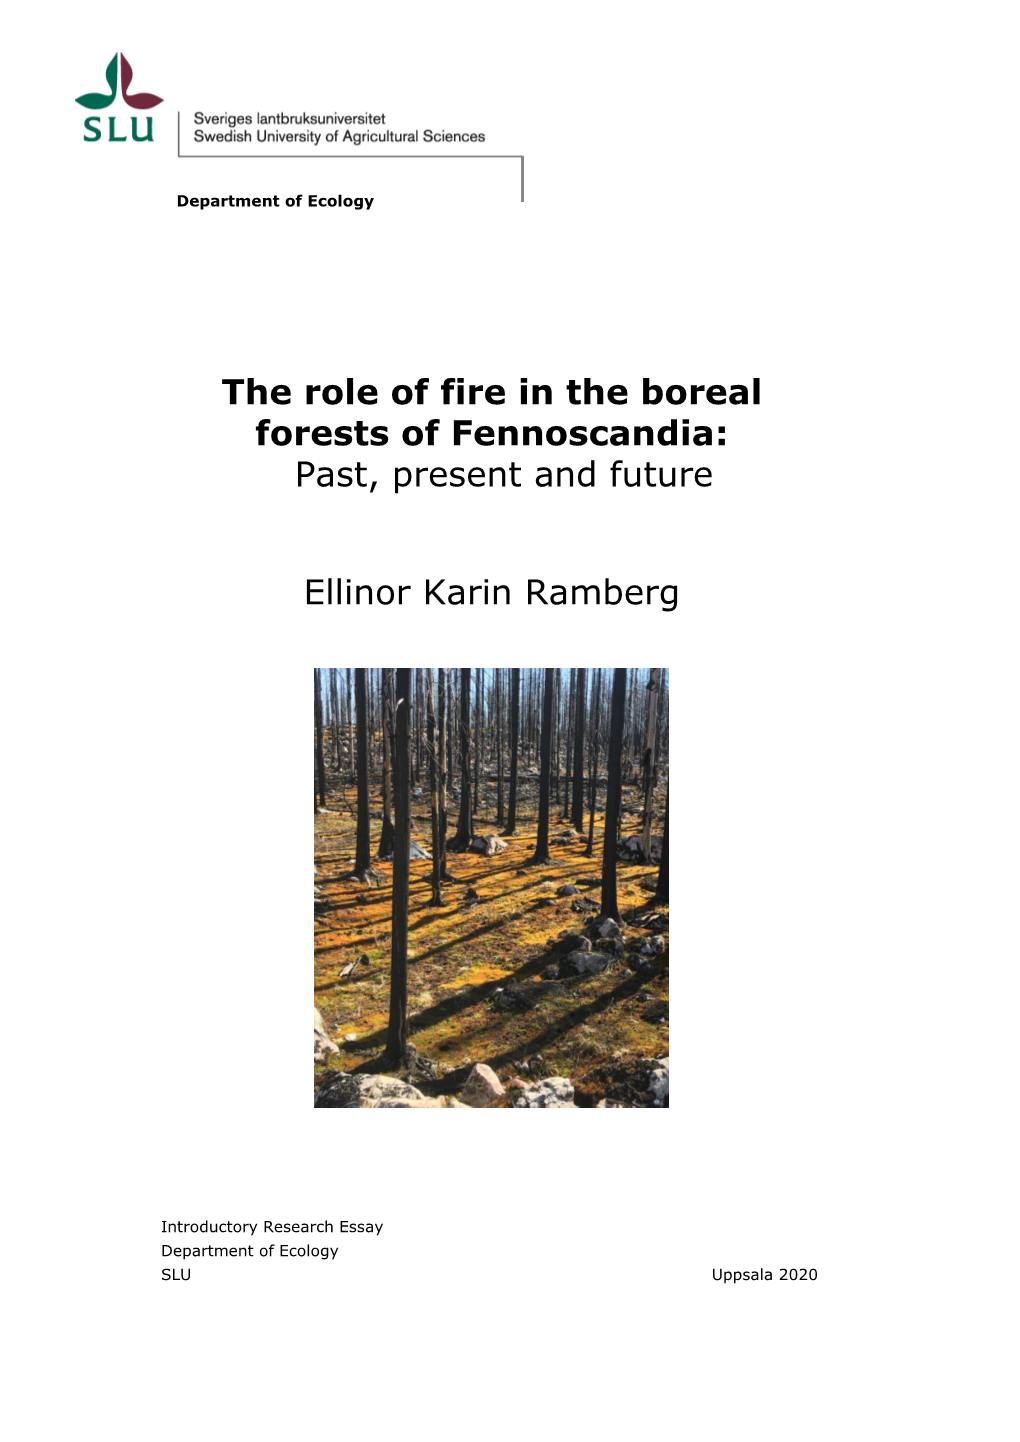 The Role of Fire in the Boreal Forests of Fennoscandia: Past, Present and Future Ellinor Karin Ramberg